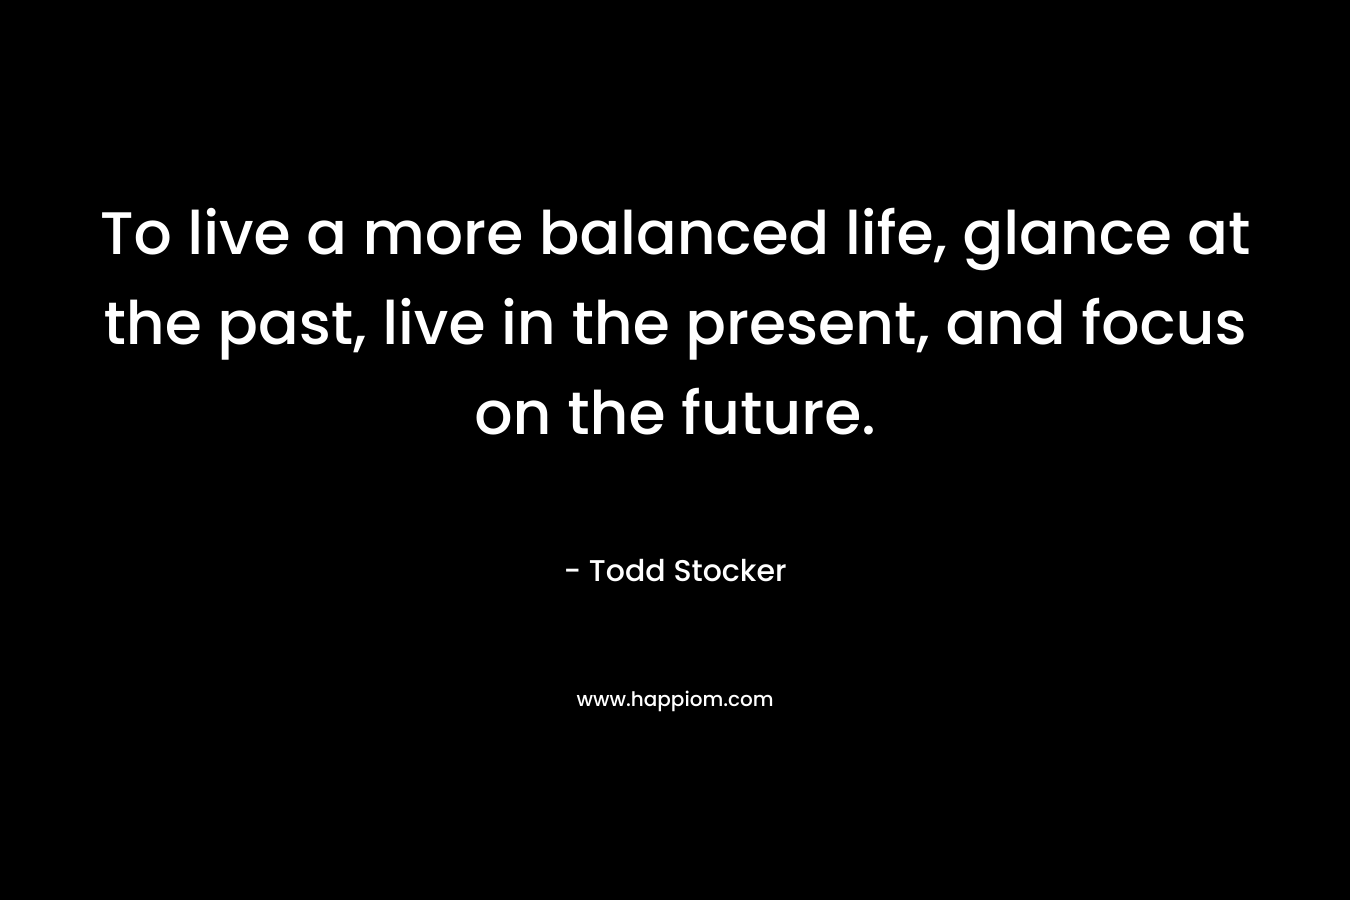 To live a more balanced life, glance at the past, live in the present, and focus on the future.